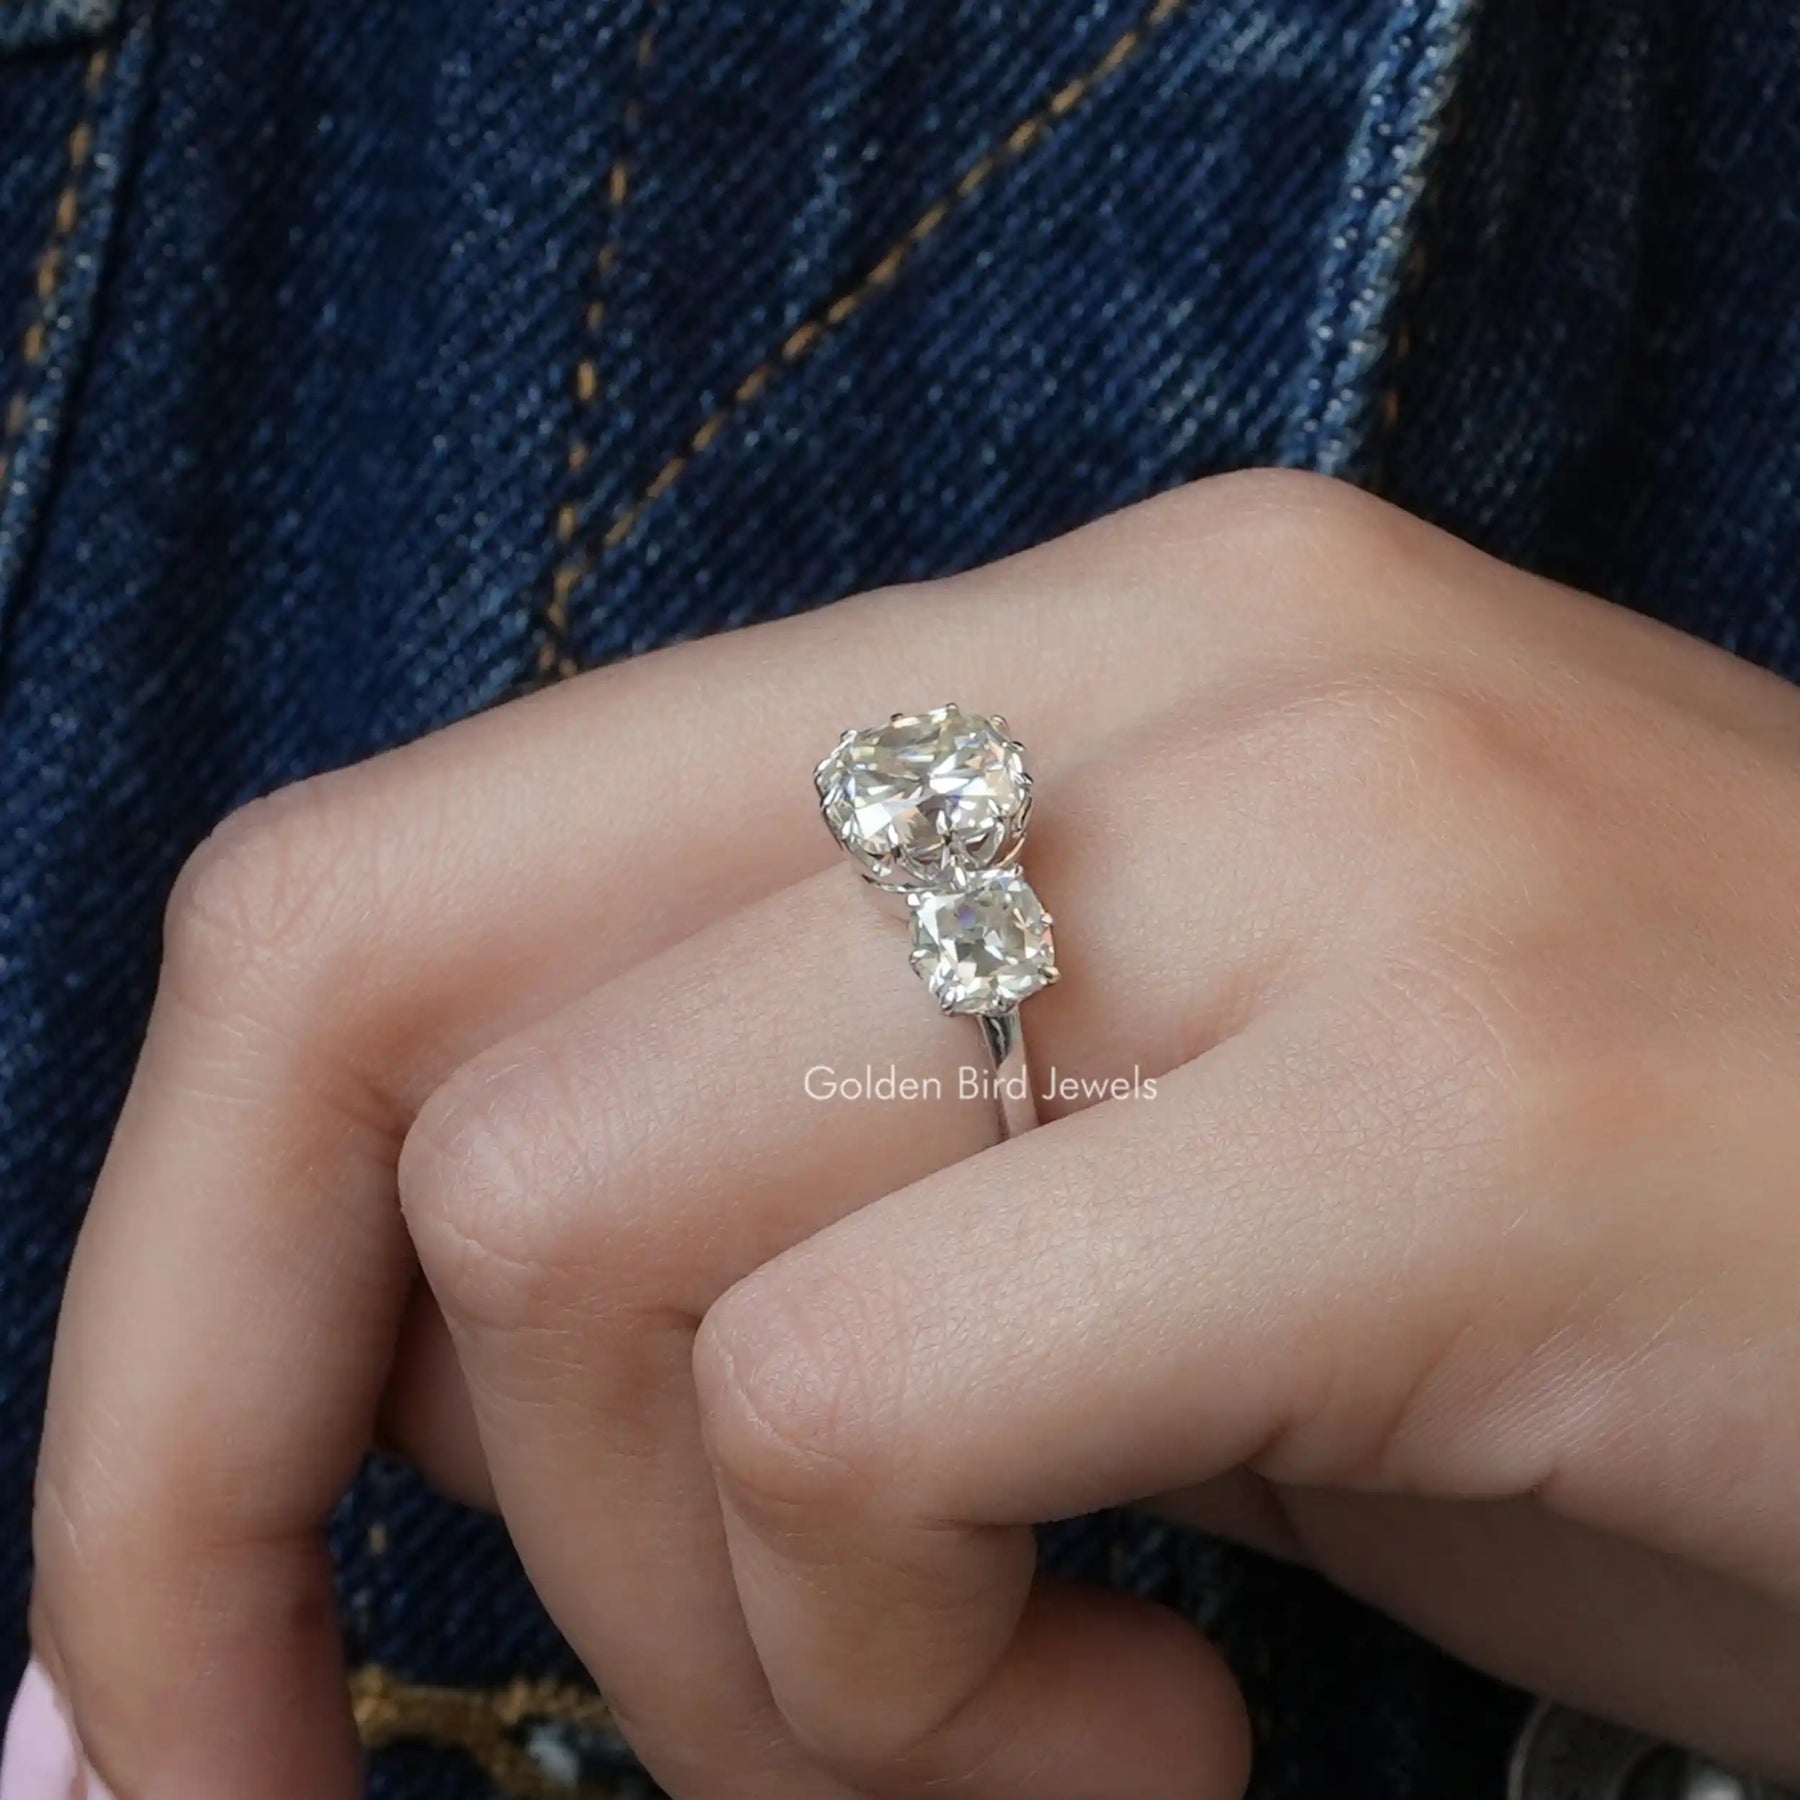 [This cushion cut moissanite ring set in prong setting]-[Golden Bird Jewels]